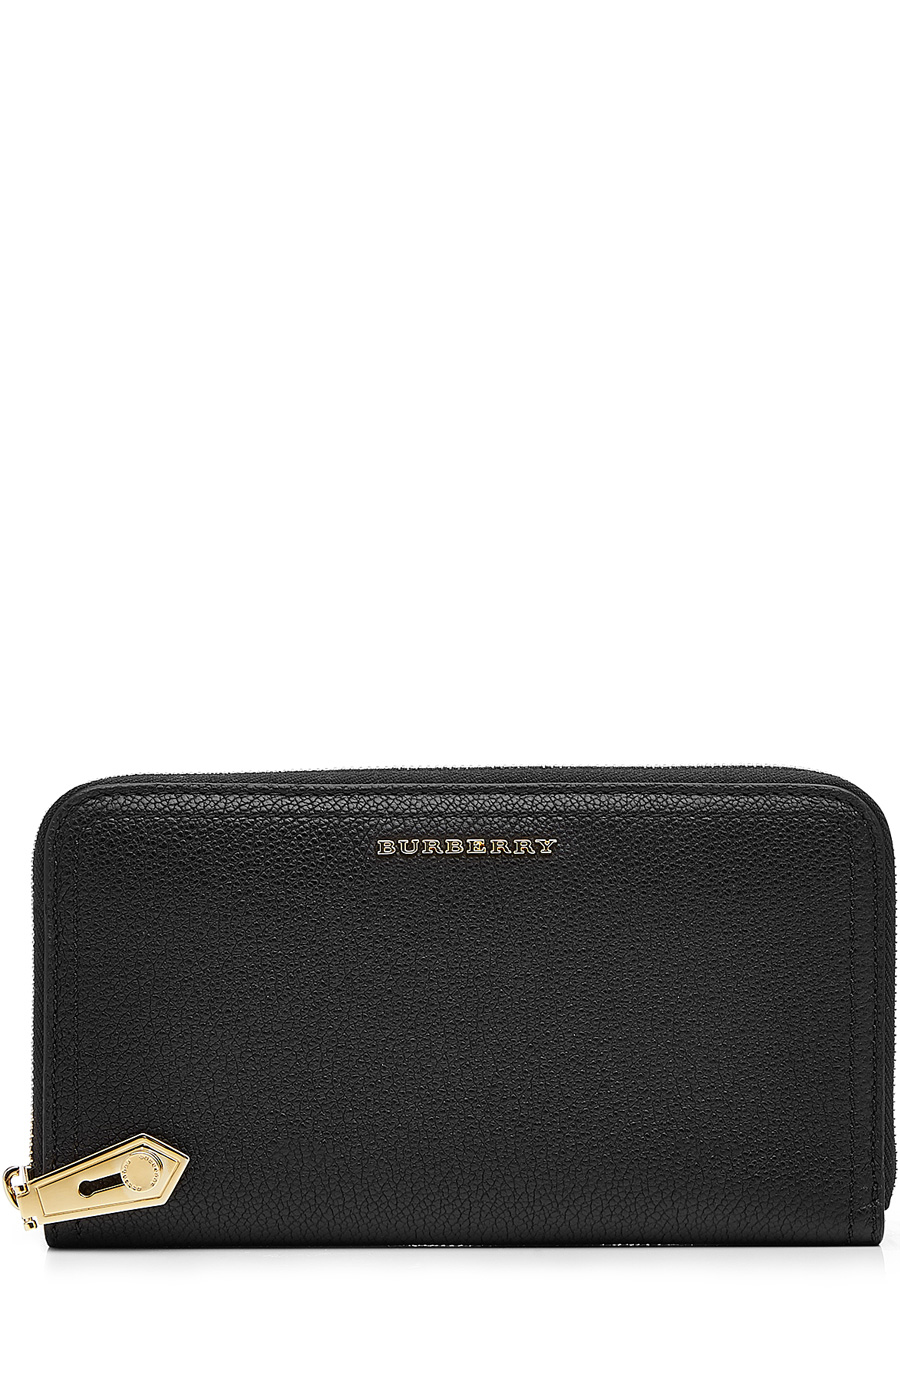 Burberry Leather Wallet | ModeSens